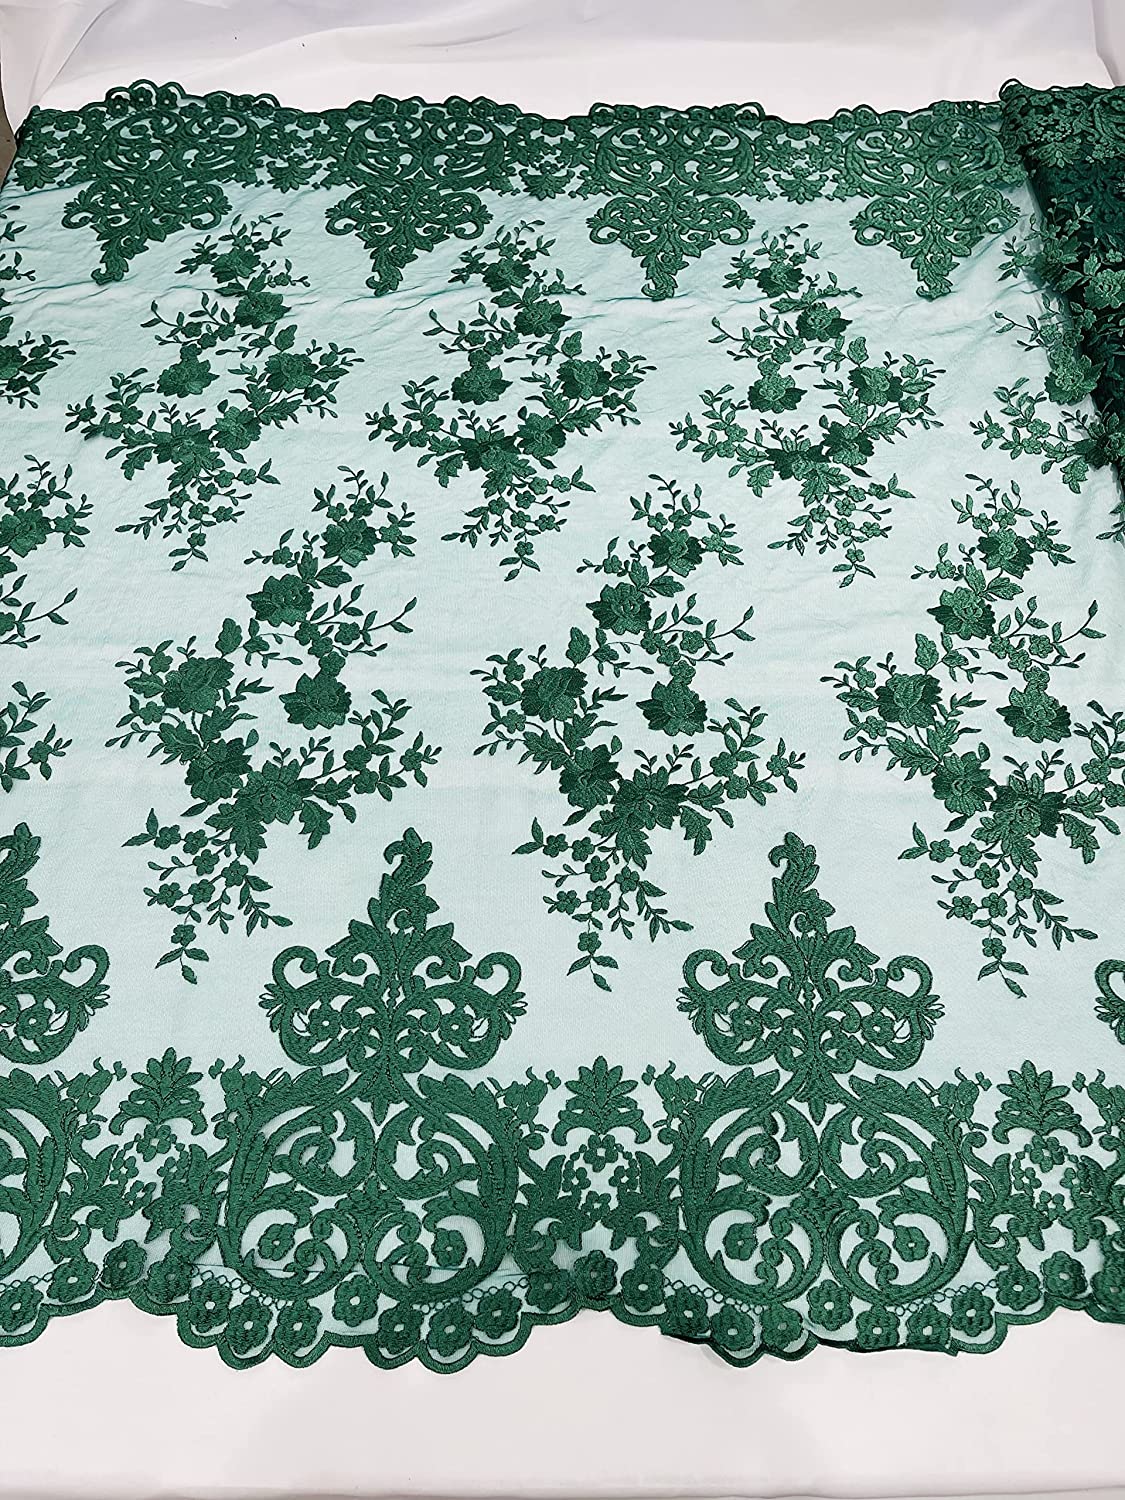 54" Wide Elegant Flower Damask Flat Lace Embroidery On A Mesh (1 Yard, Teal Green)